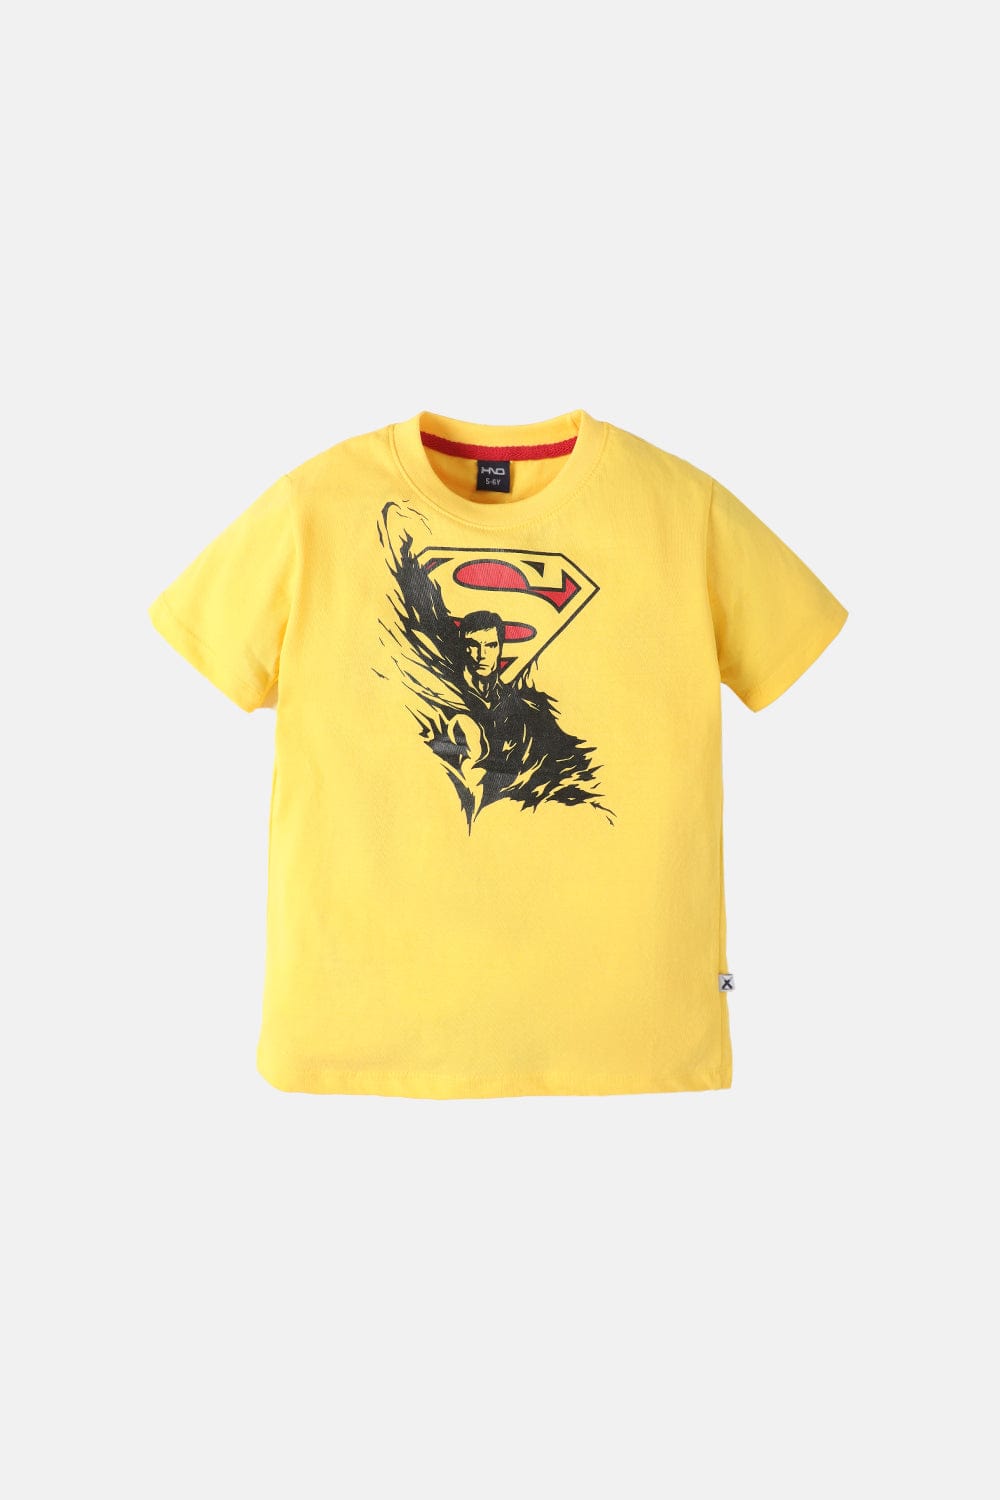 Hope Not Out by Shahid Afridi Boys Knit T-Shirt Yellow Superman T-Shirt